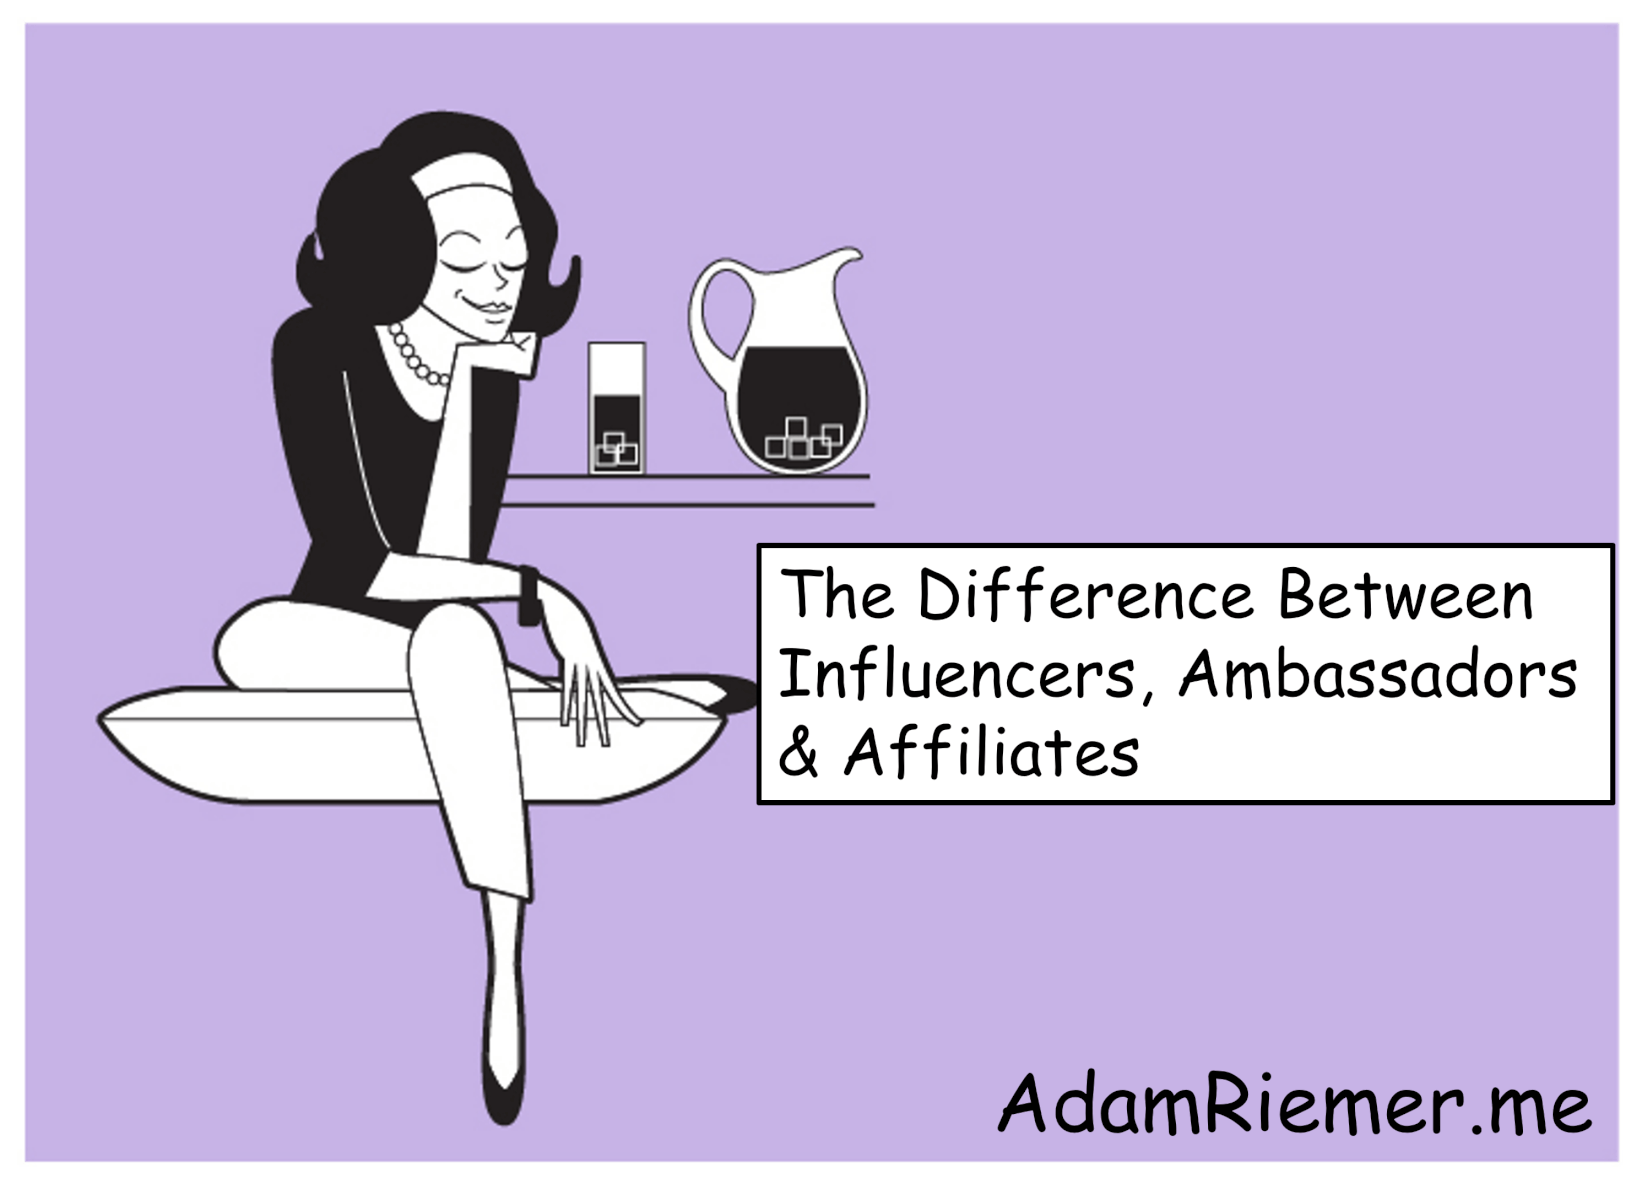 The Difference Between Influencers, Ambassadors & Affiliates